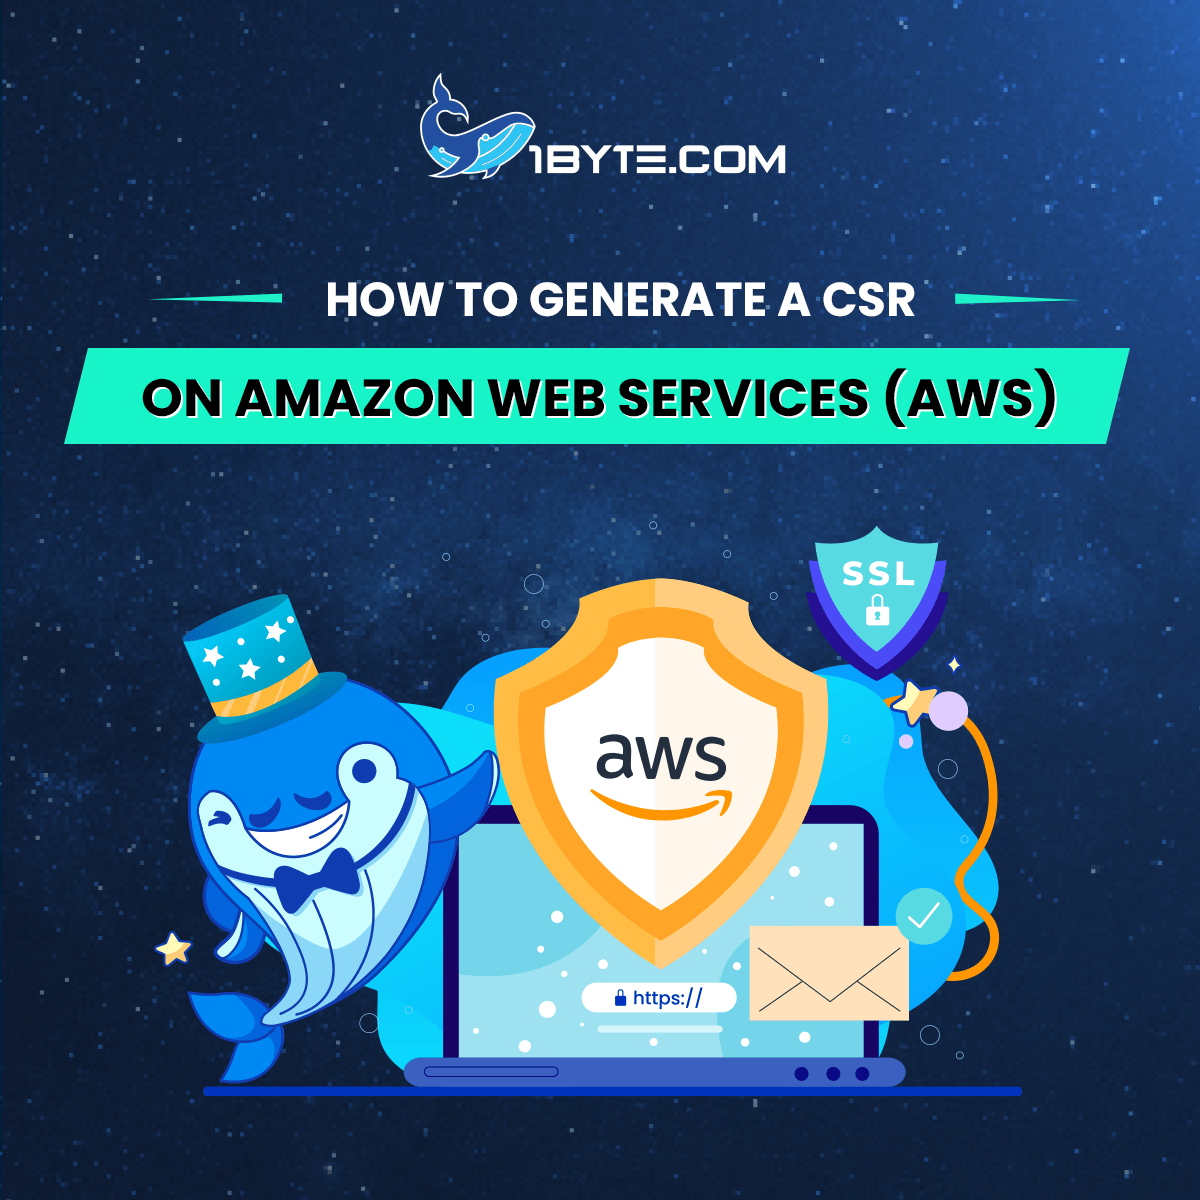 How to Generate a CSR on Amazon Web Services (AWS)